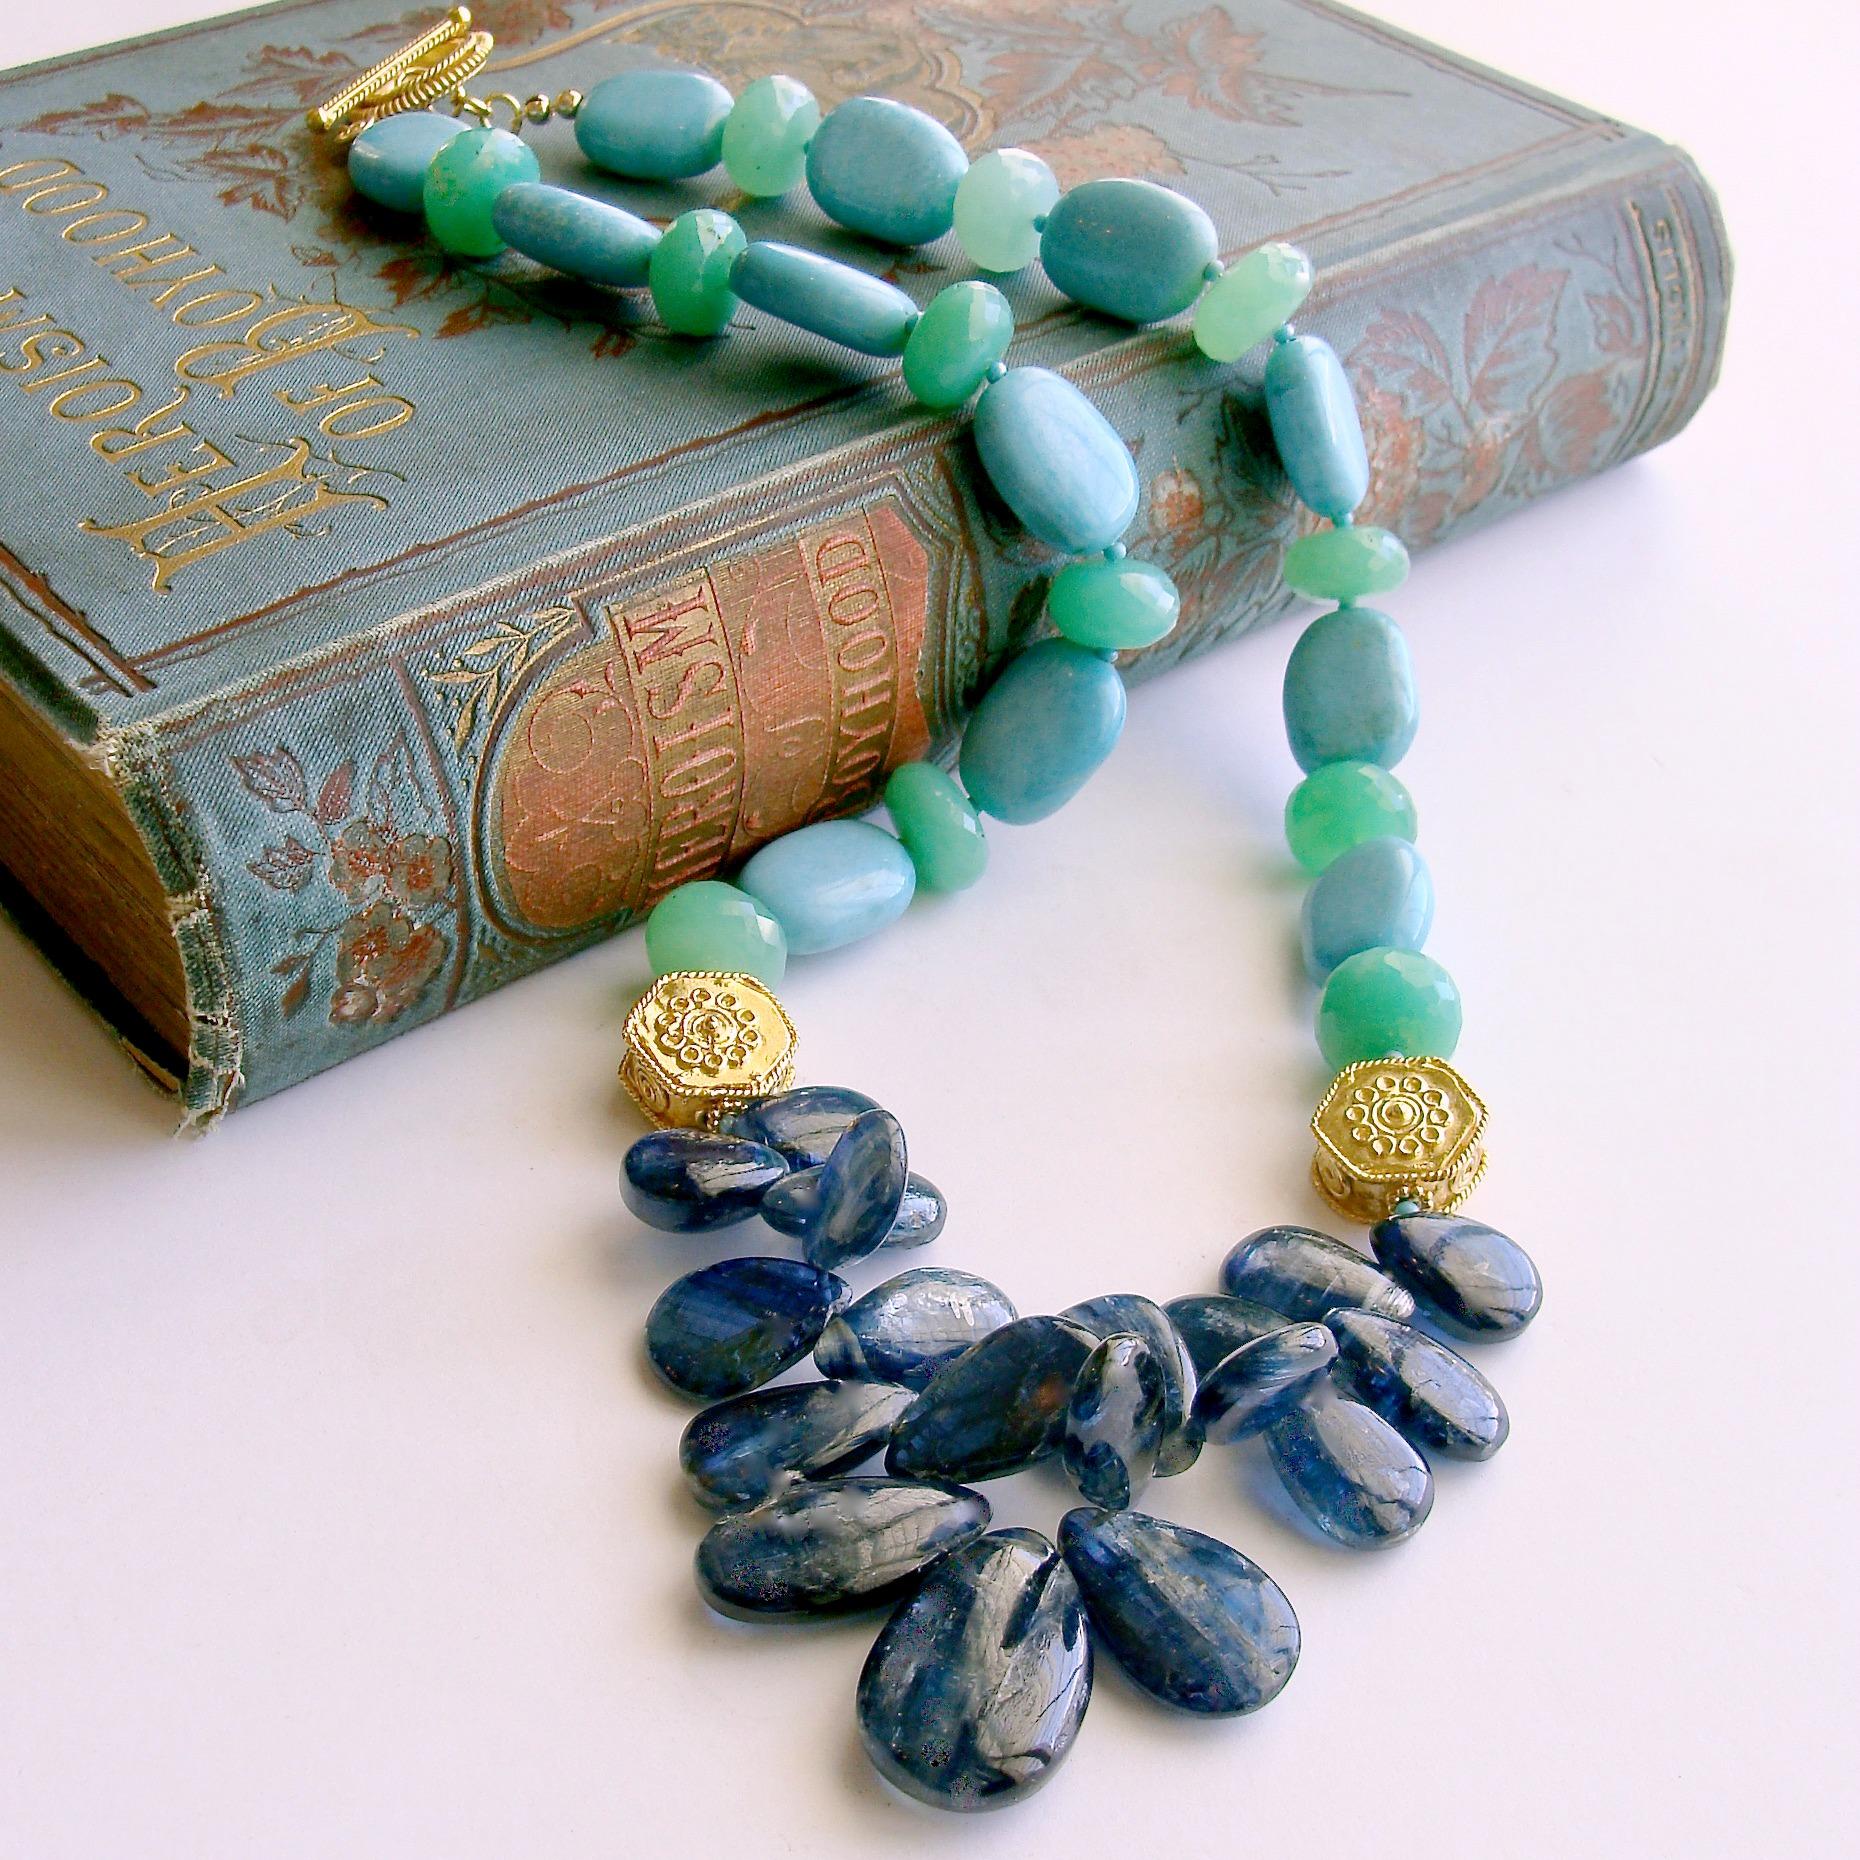 Tumbled Kyanite Turquoise and Chrysoprase Statement Necklace, Lala II Necklace